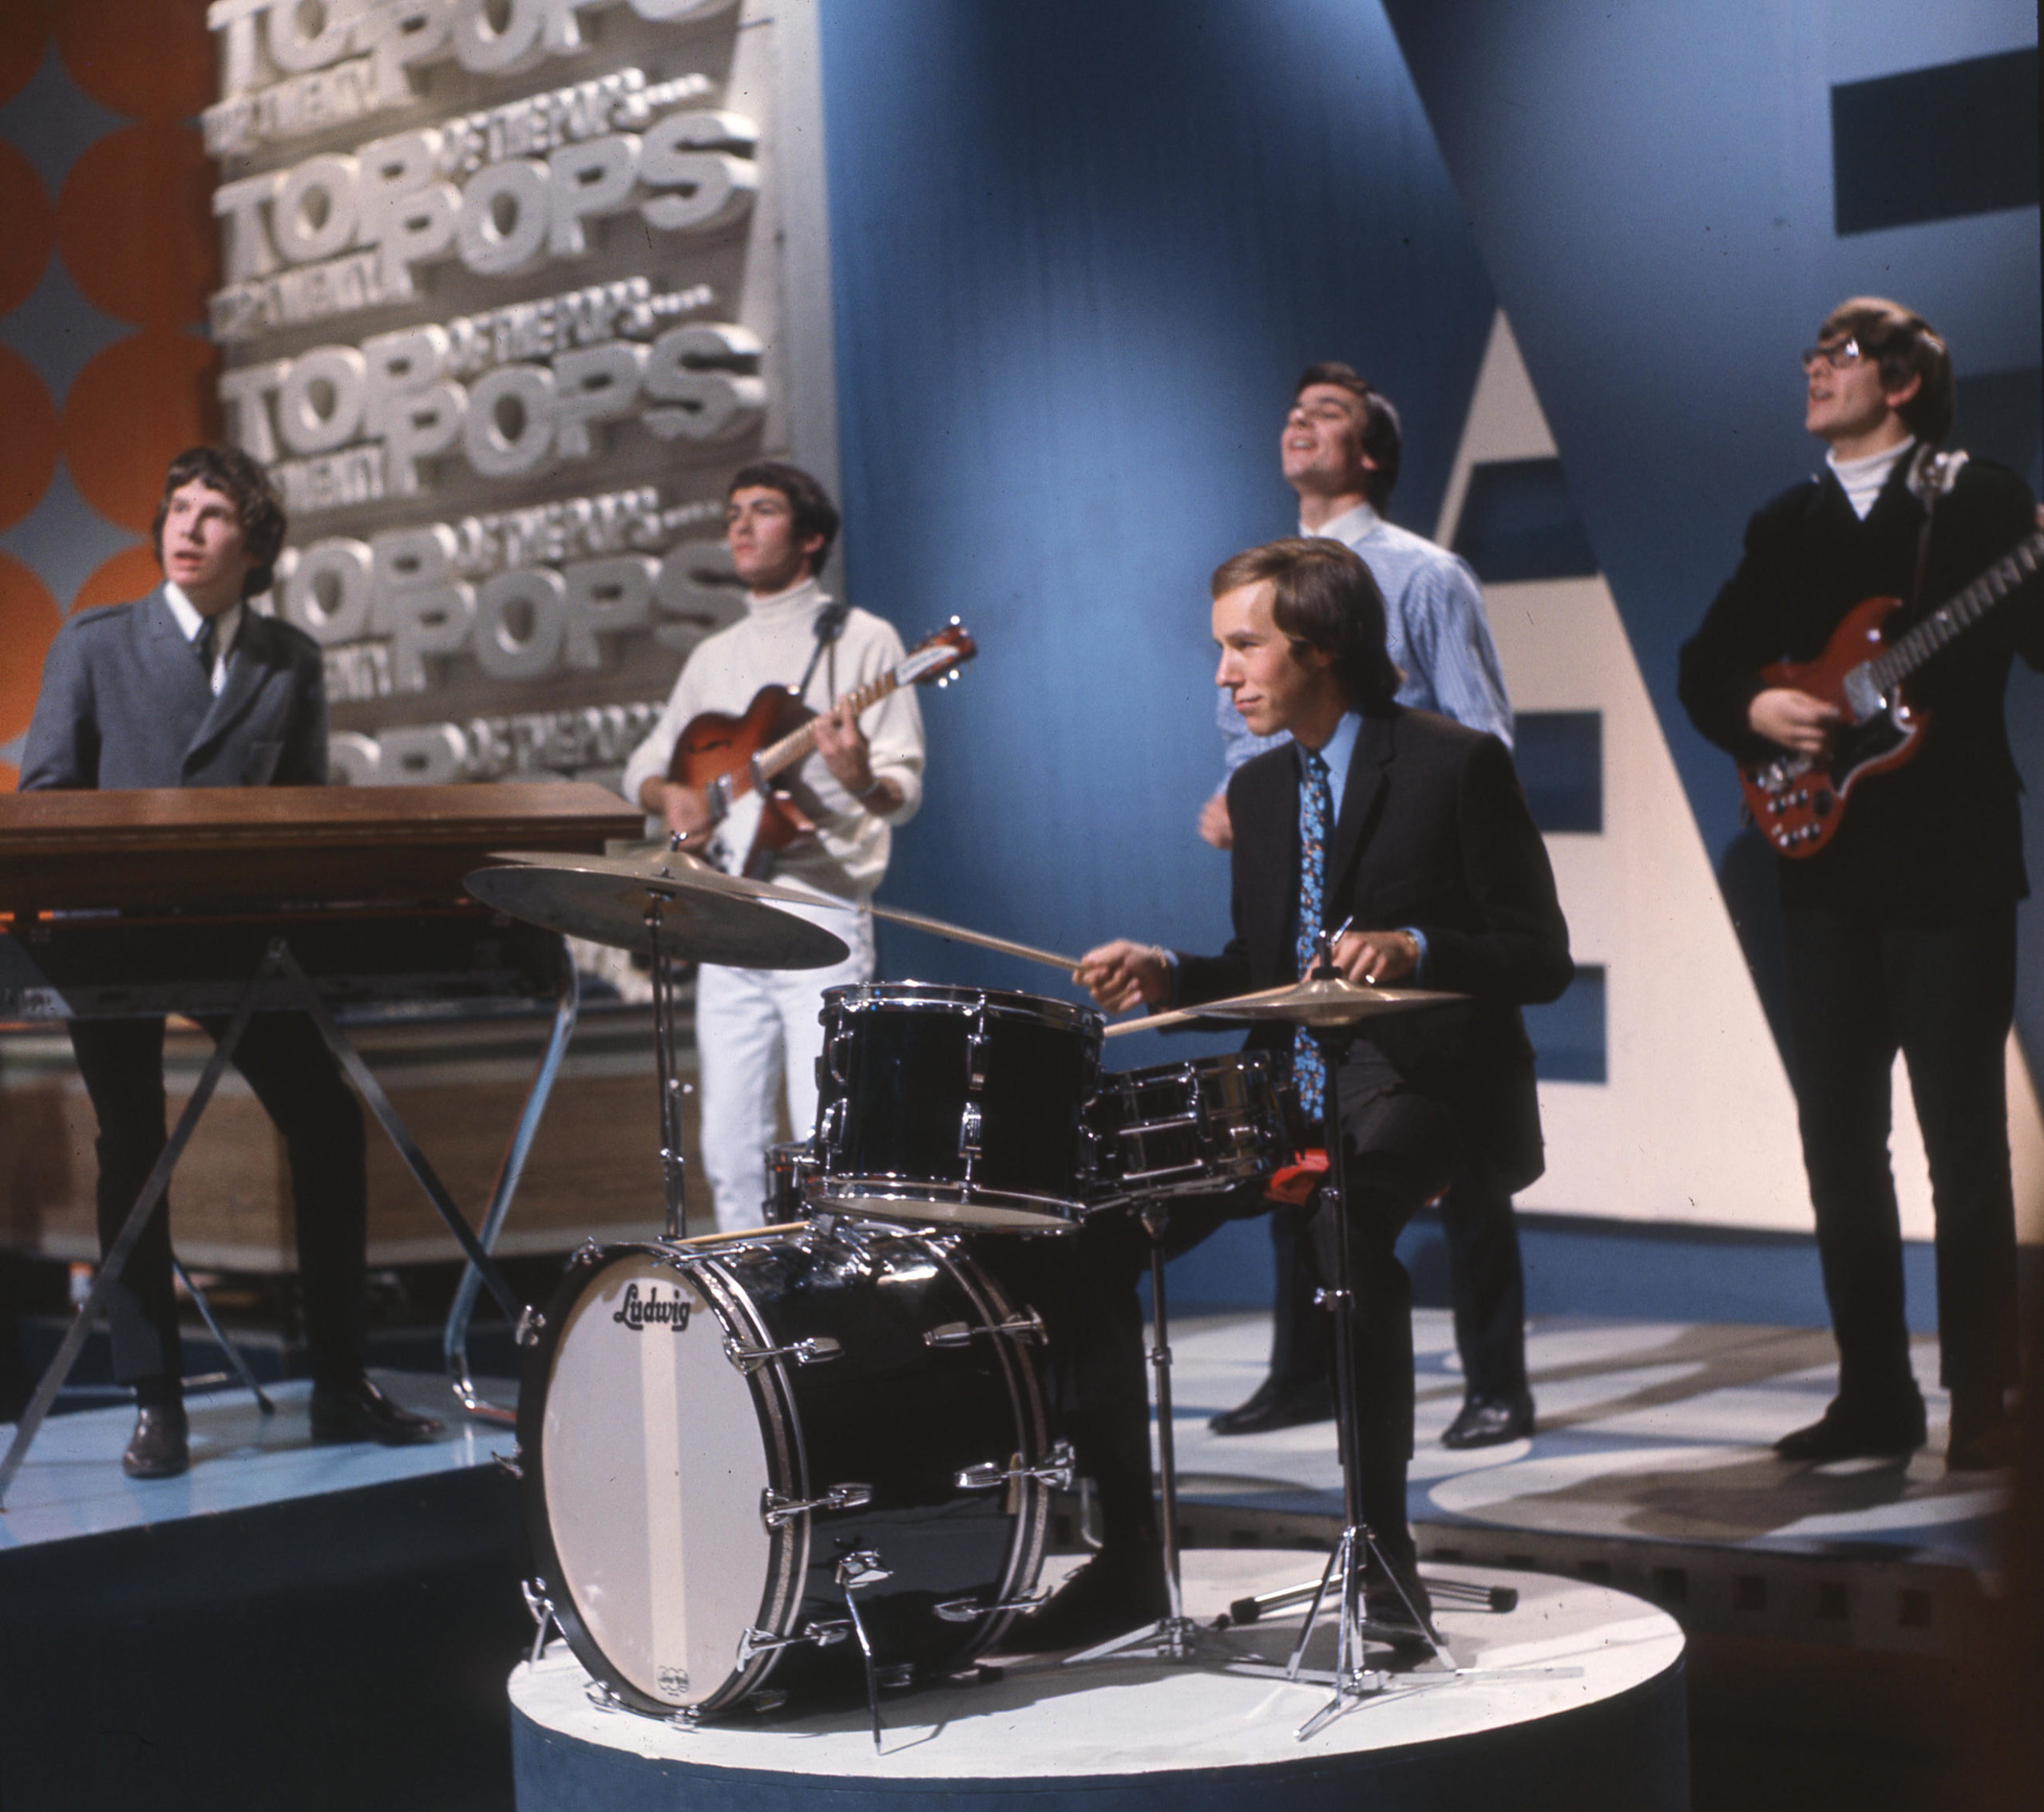 FEC8MG ZOMBIES English pop group on BBC TV's Top of the Pops in September 1965. Photo Tony Gale. Image shot 1965. Exact date unknown.